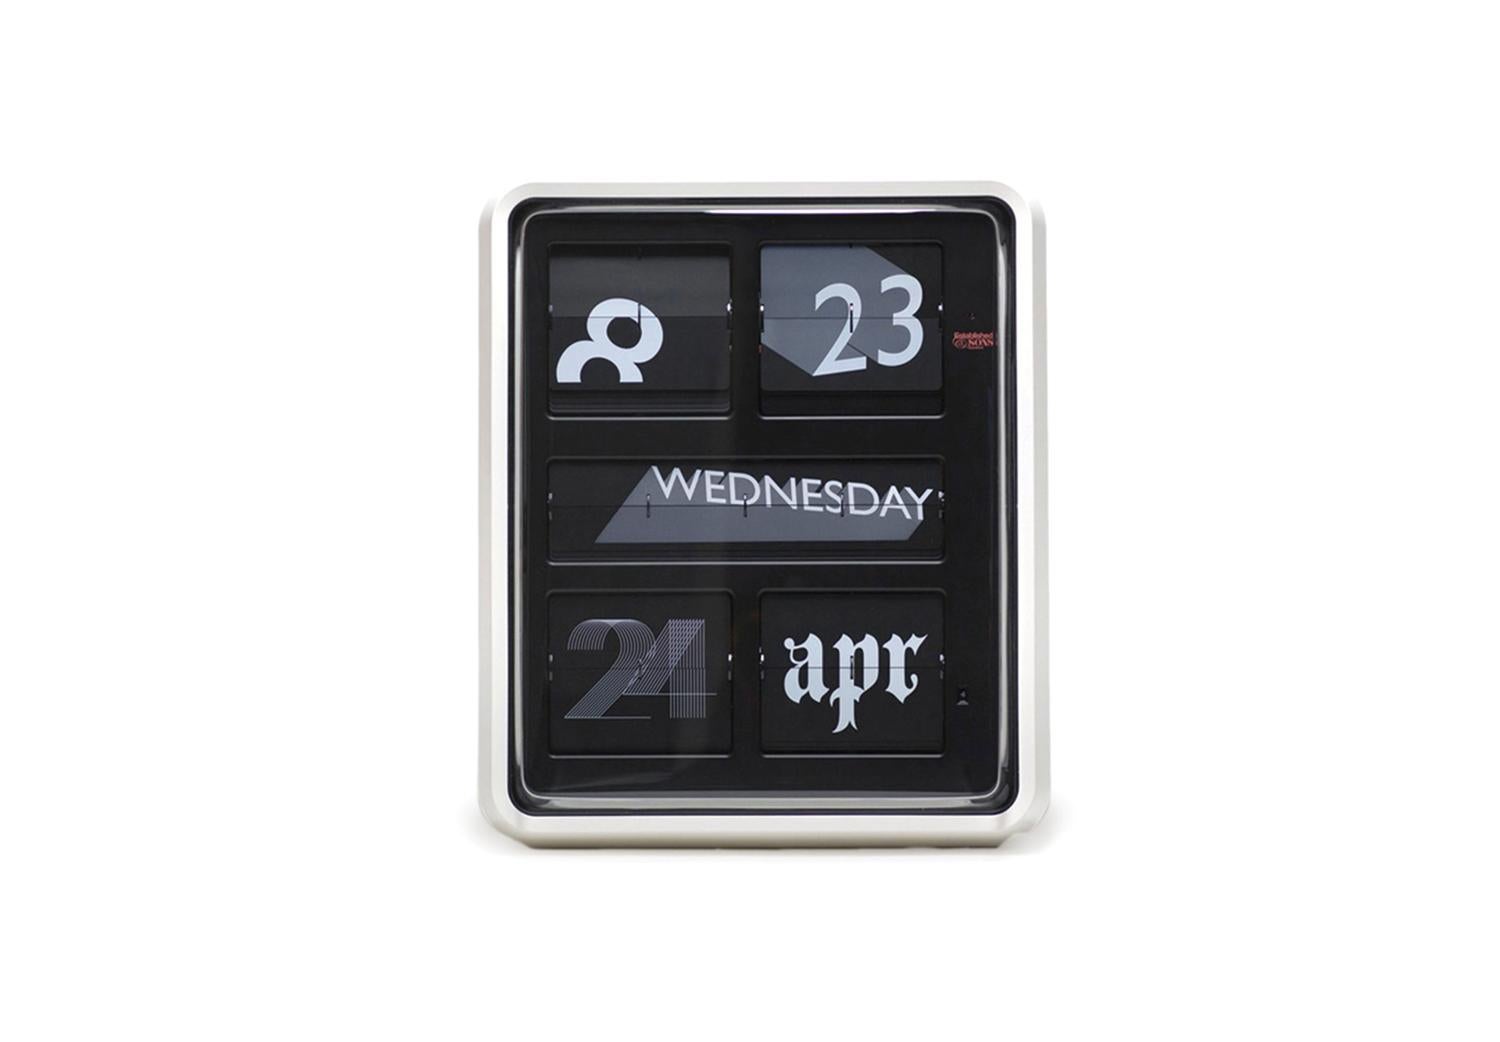 The iconic calendar clock, with its distinctive form and flip mechanism, has an established following in design circles. Sebastian Wrong deliberately increases our attraction to its retro look by introducing an ever-changing display. The font clock